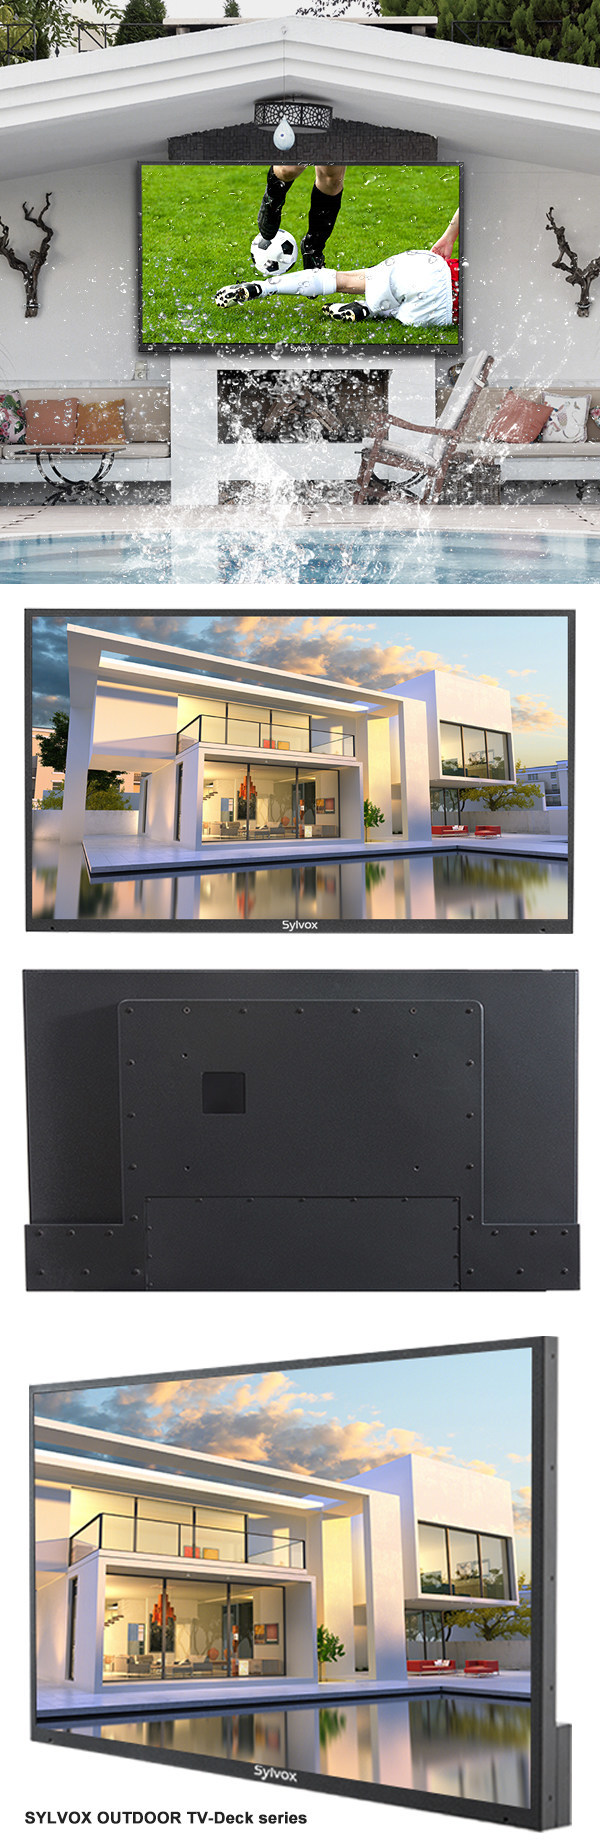 Sylvox 3rd Generation Outdoor TVs Global Released with More Comprehensive Performance